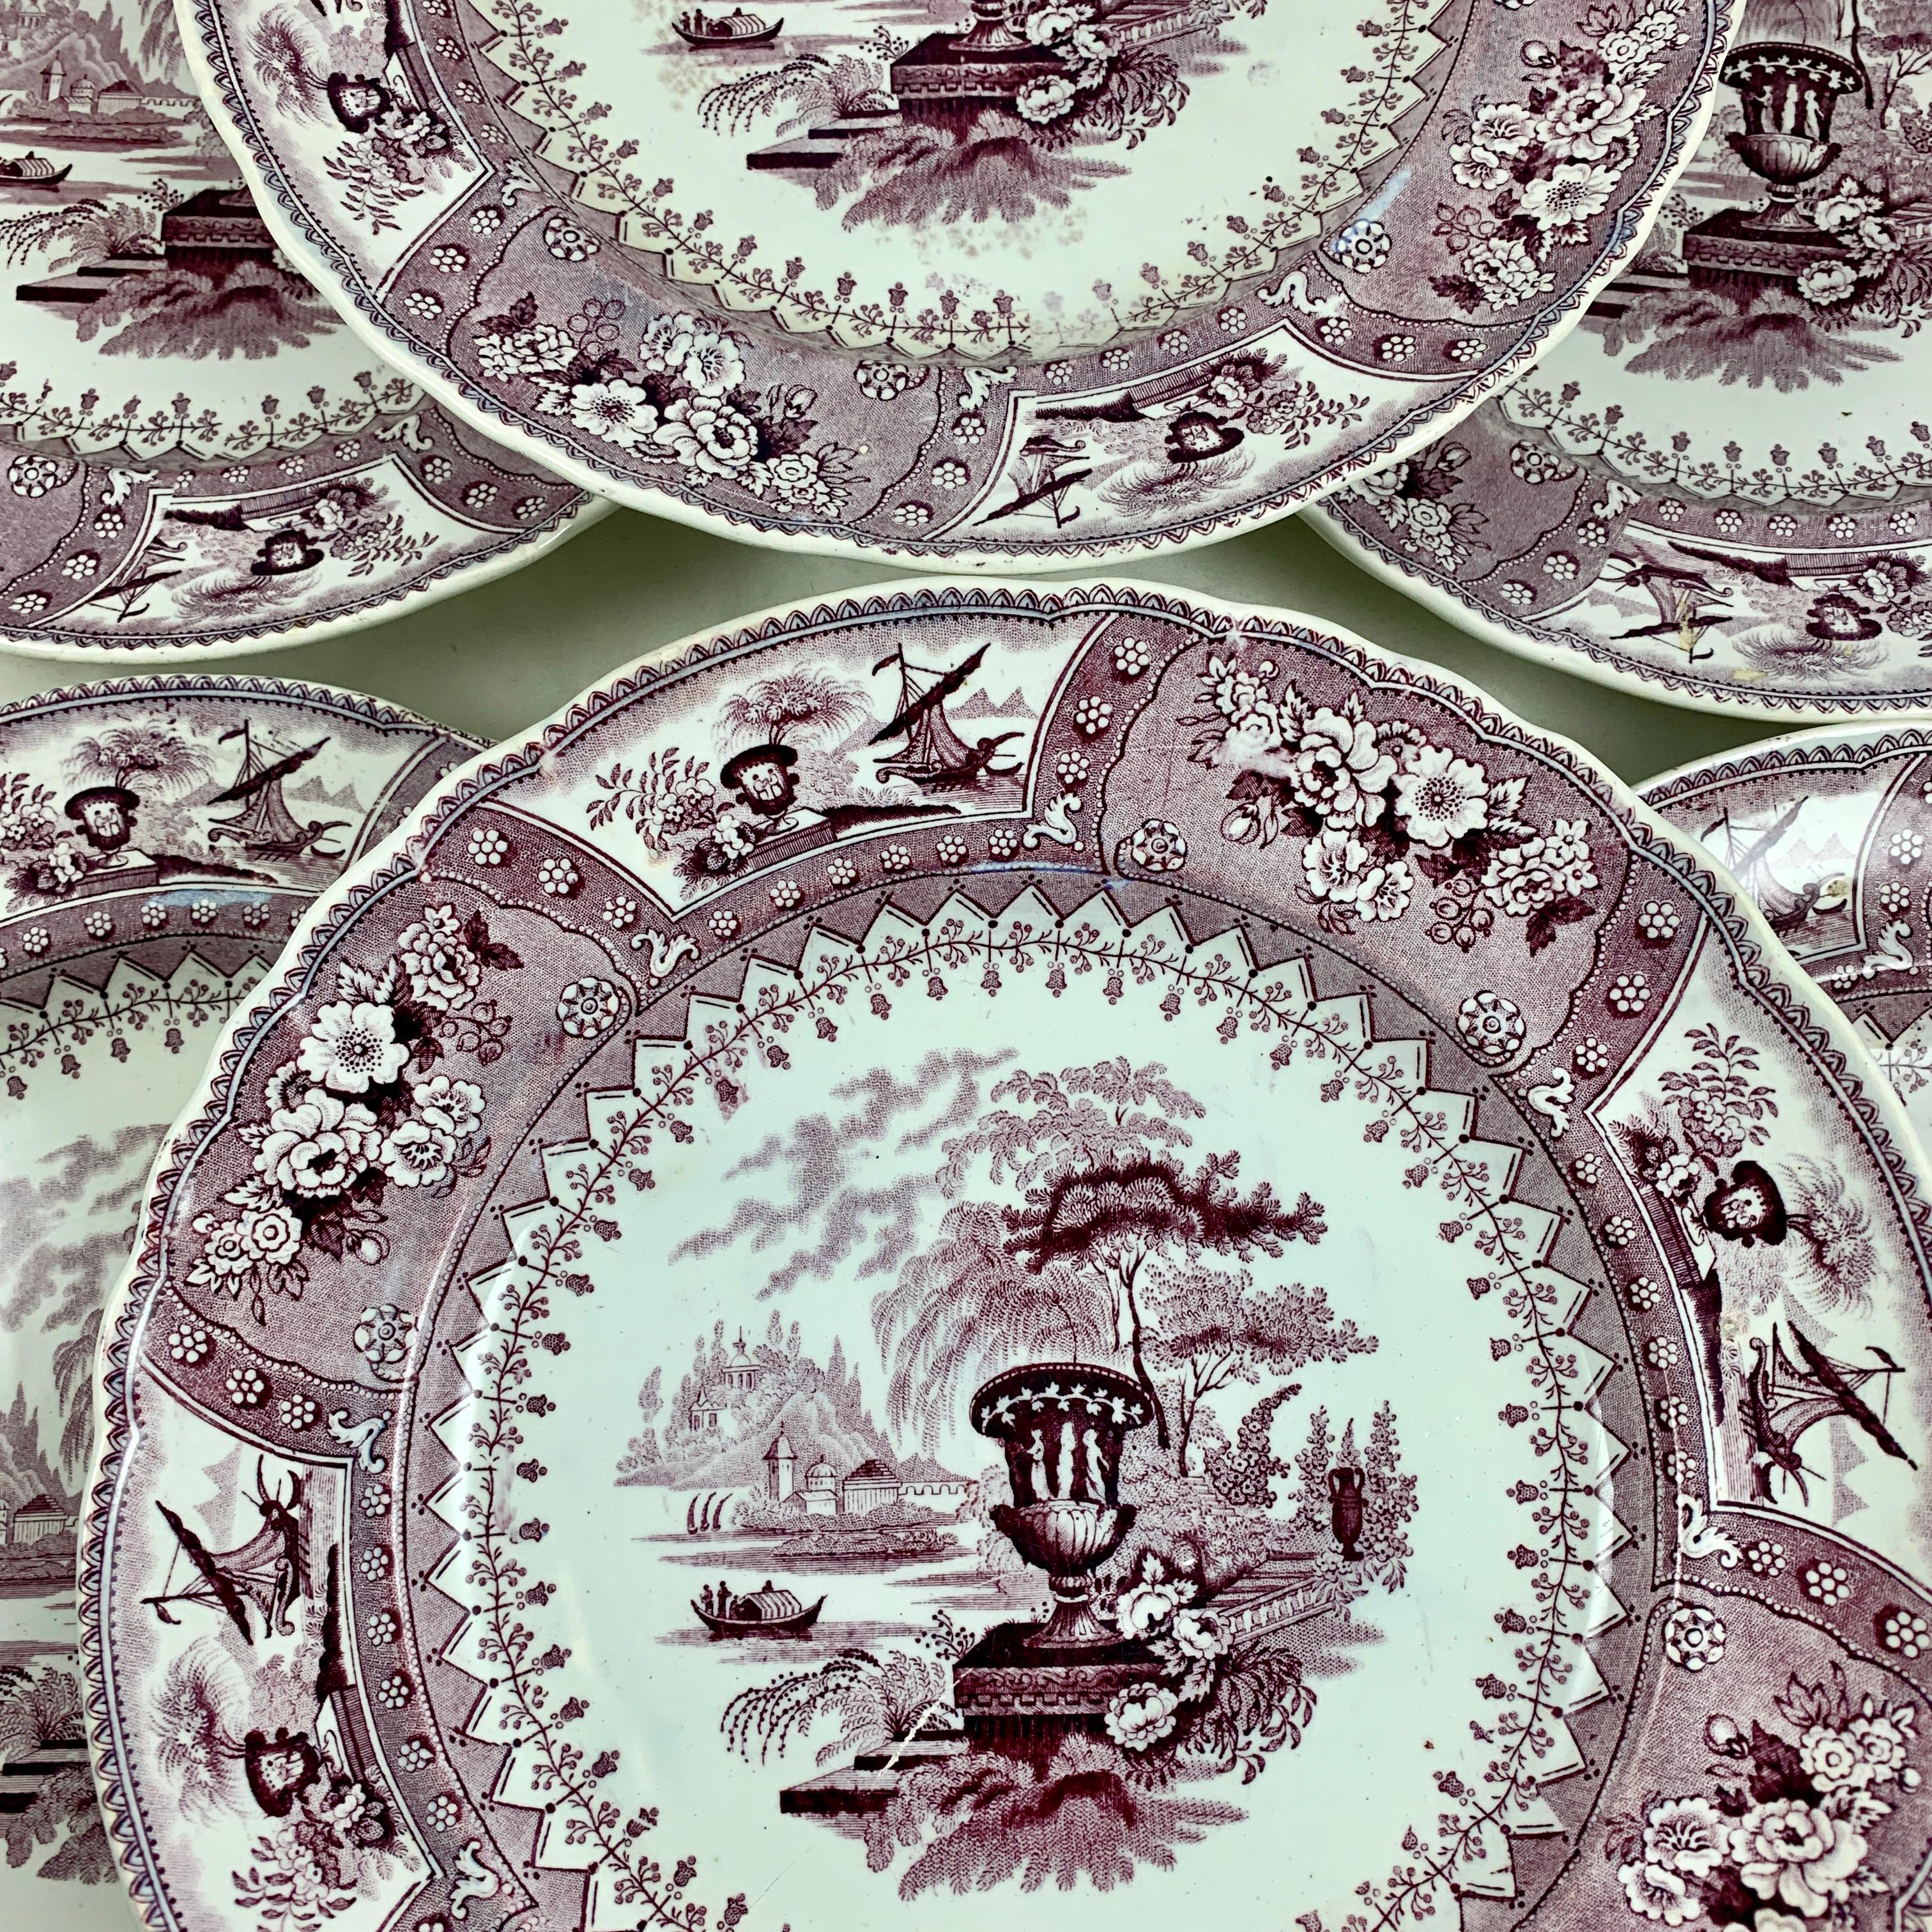 A set of six, transfer-printed dinner plates in the ‘Canova’ pattern, made by T. Mayer in Longport, Stoke-on-Trent, Staffordshire, England, circa 1830.

Mayer operated in Staffordshire from 1826-1838.

A classical, romantic theme printed in the